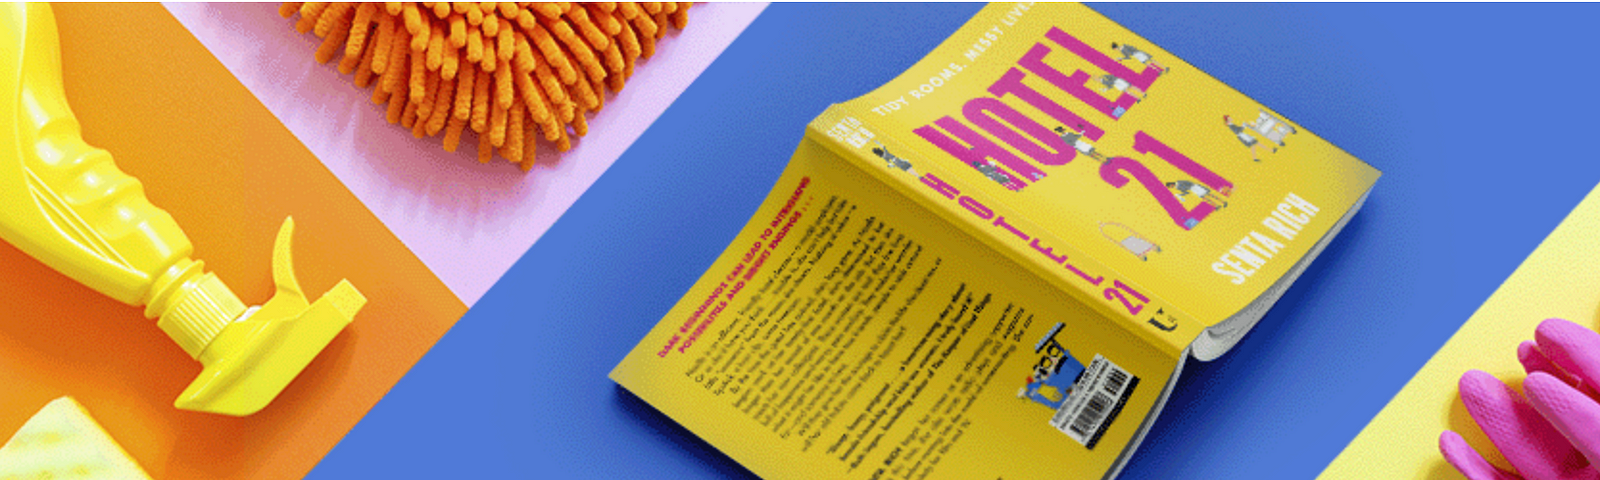 A styled photo of the book next to hotel cleaning supplies on a colorful background.